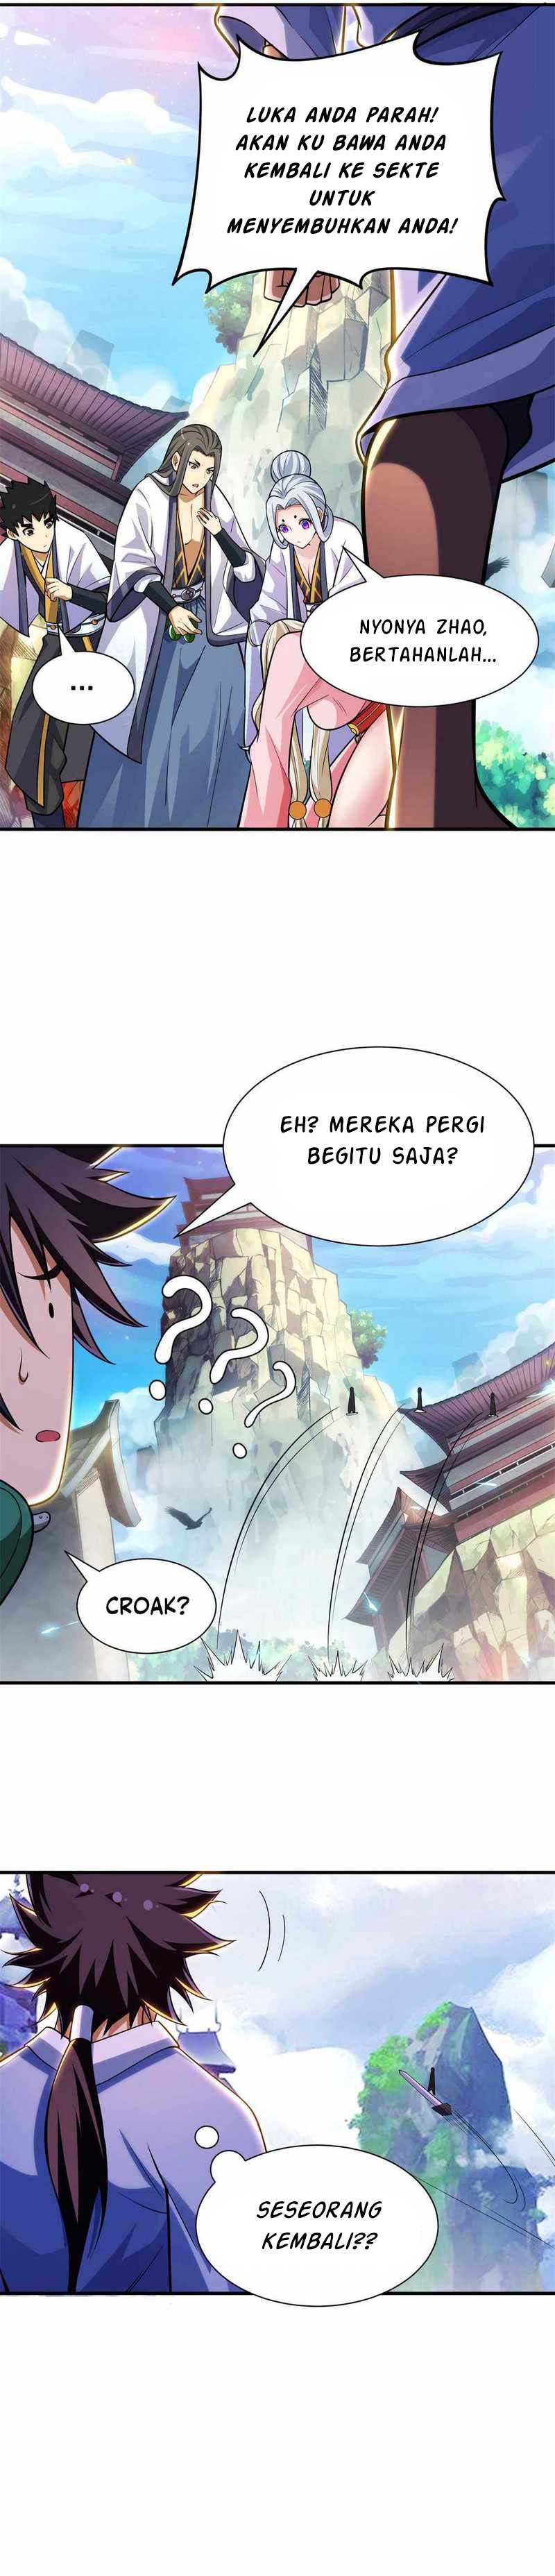 Dilarang COPAS - situs resmi www.mangacanblog.com - Komik i just want to be beaten to death by everyone 026 - chapter 26 27 Indonesia i just want to be beaten to death by everyone 026 - chapter 26 Terbaru 15|Baca Manga Komik Indonesia|Mangacan